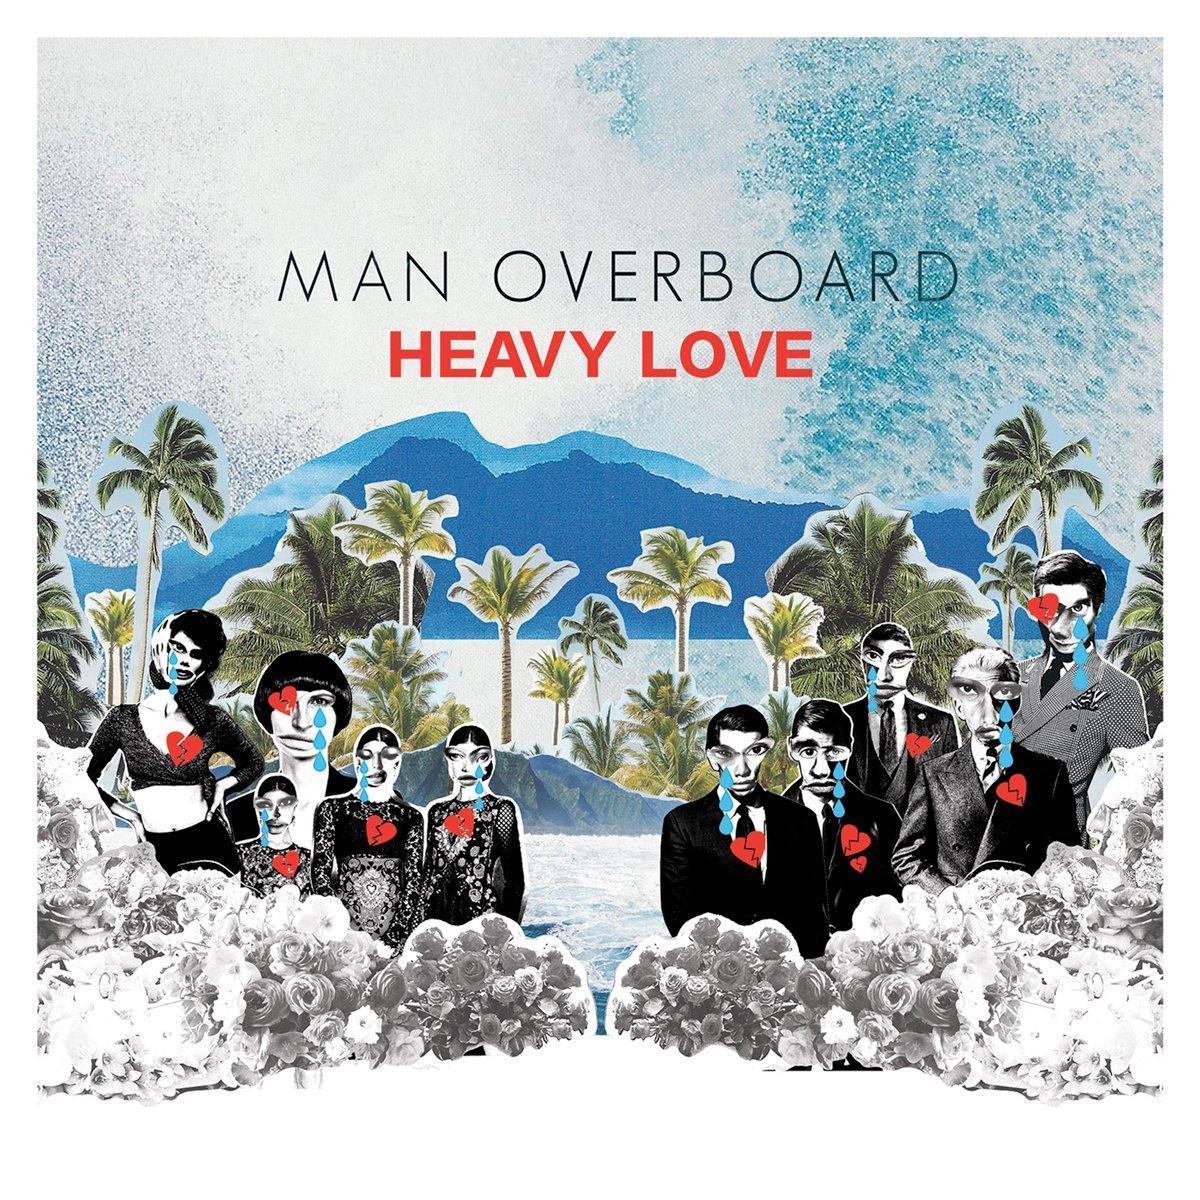 Buy – Man Overboard "Heavy Love" CD – Band & Music Merch – Cold Cuts Merch